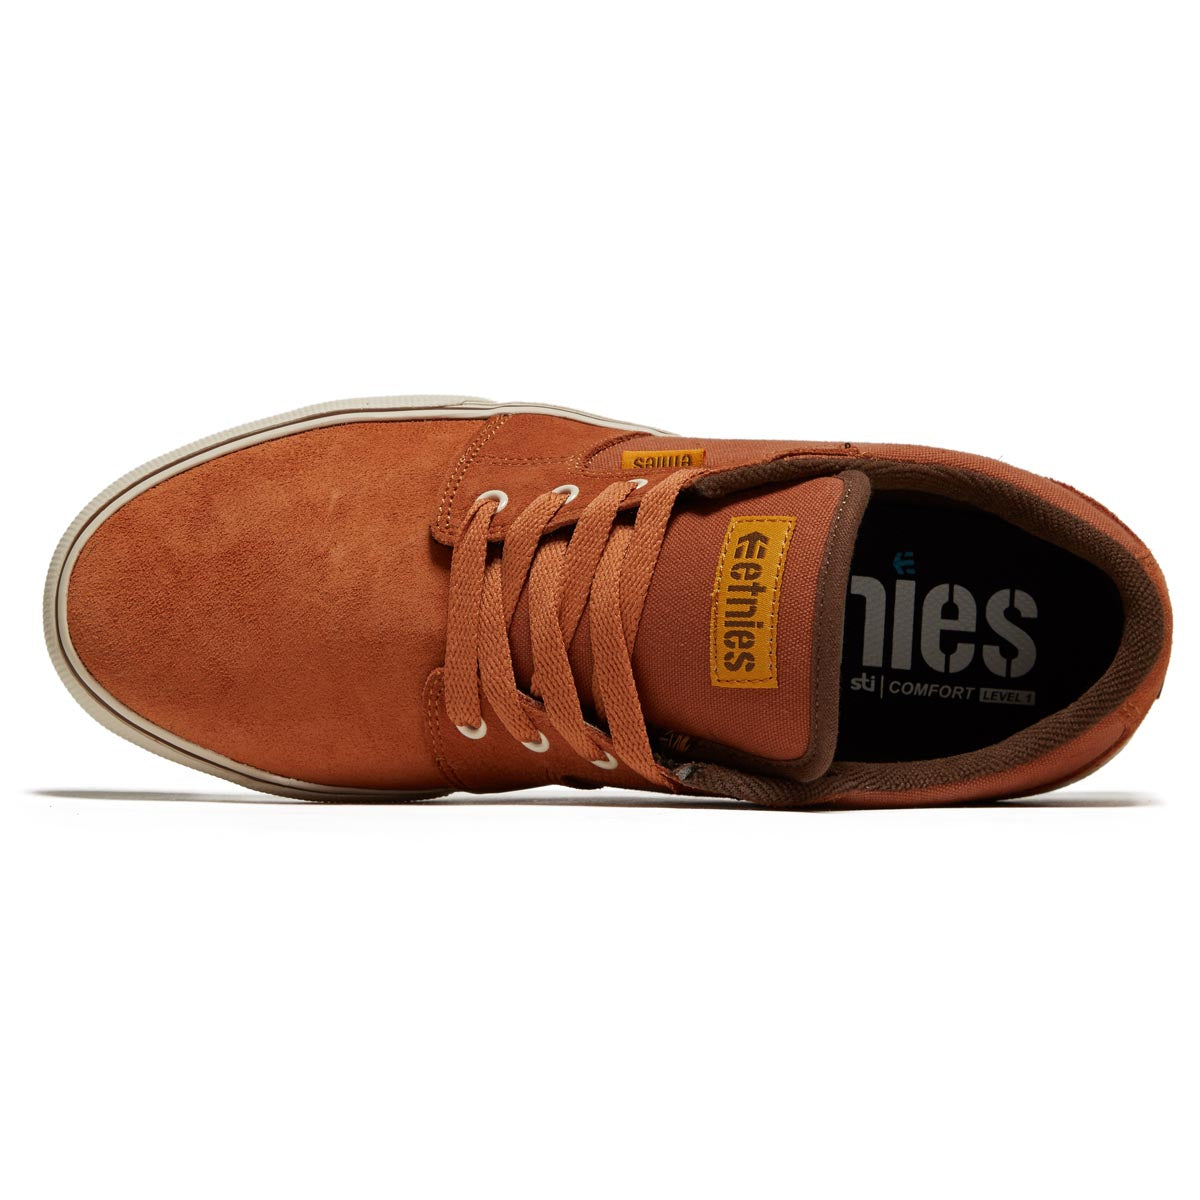 Etnies Barge Ls Shoes - Brown/Gold/Yellow image 3